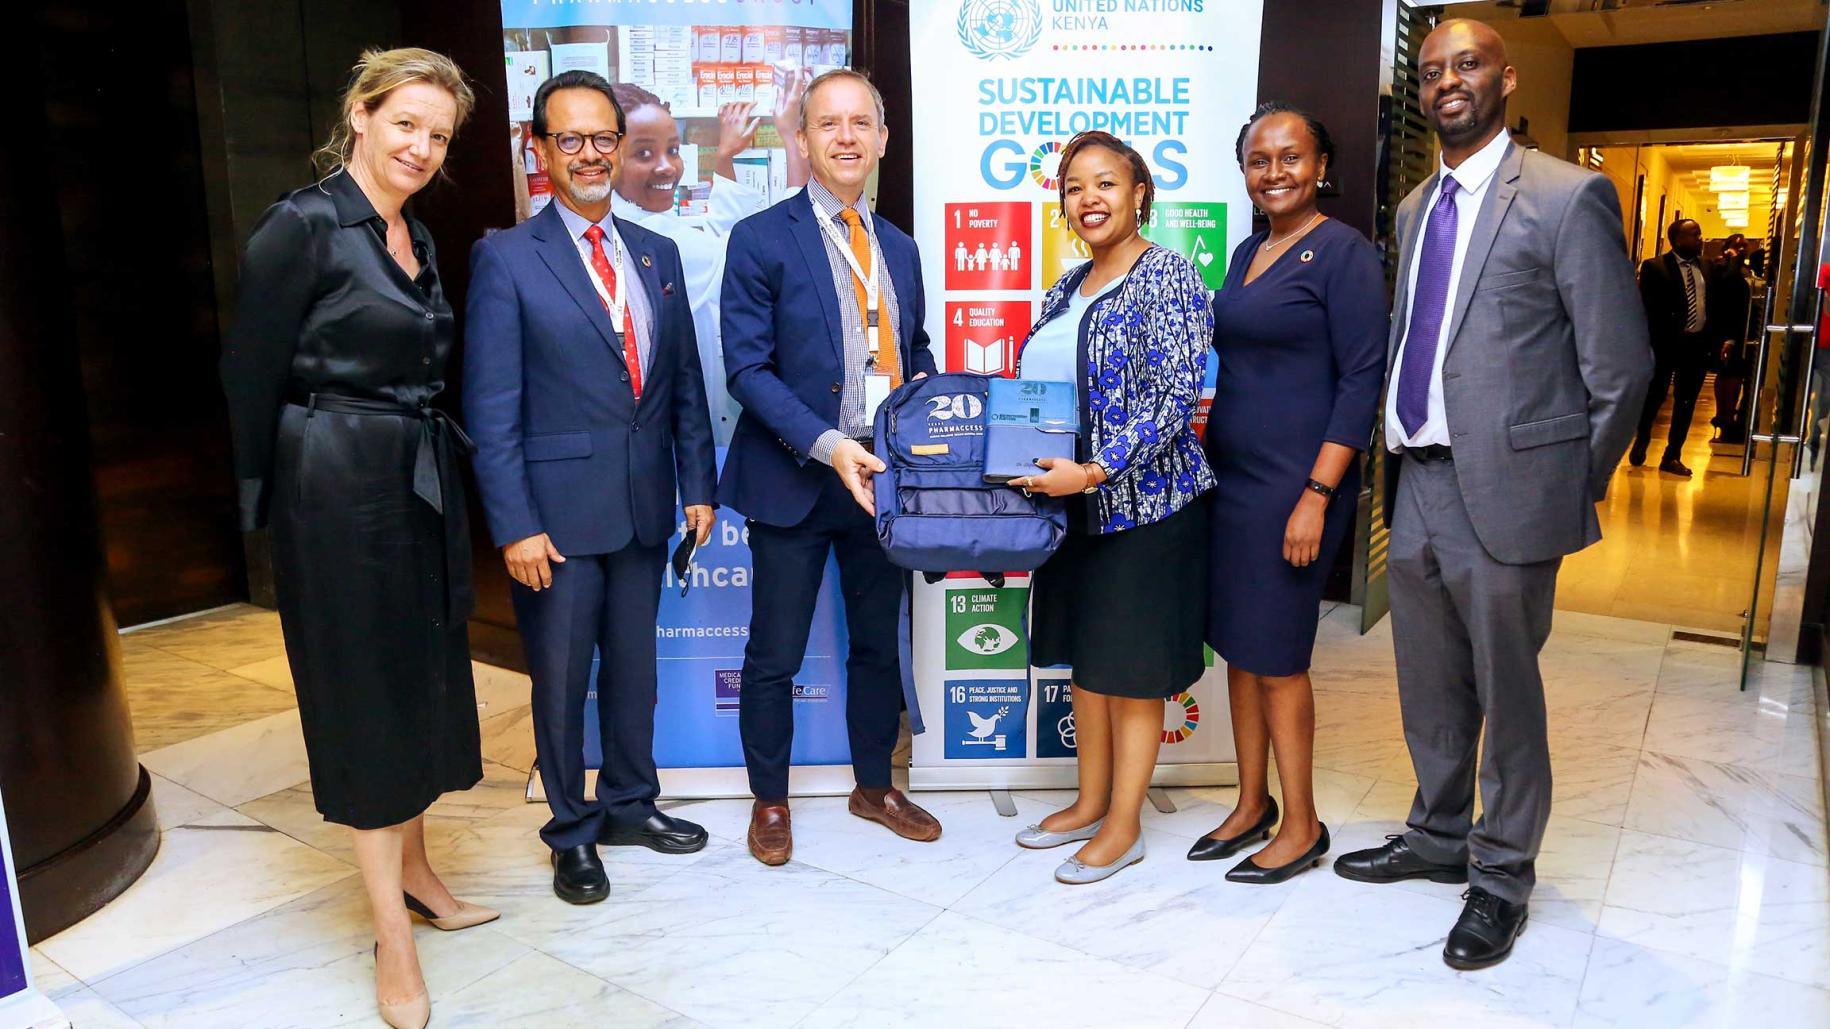 group of men and women in suits stand in front of poster displaying UN SDG logos